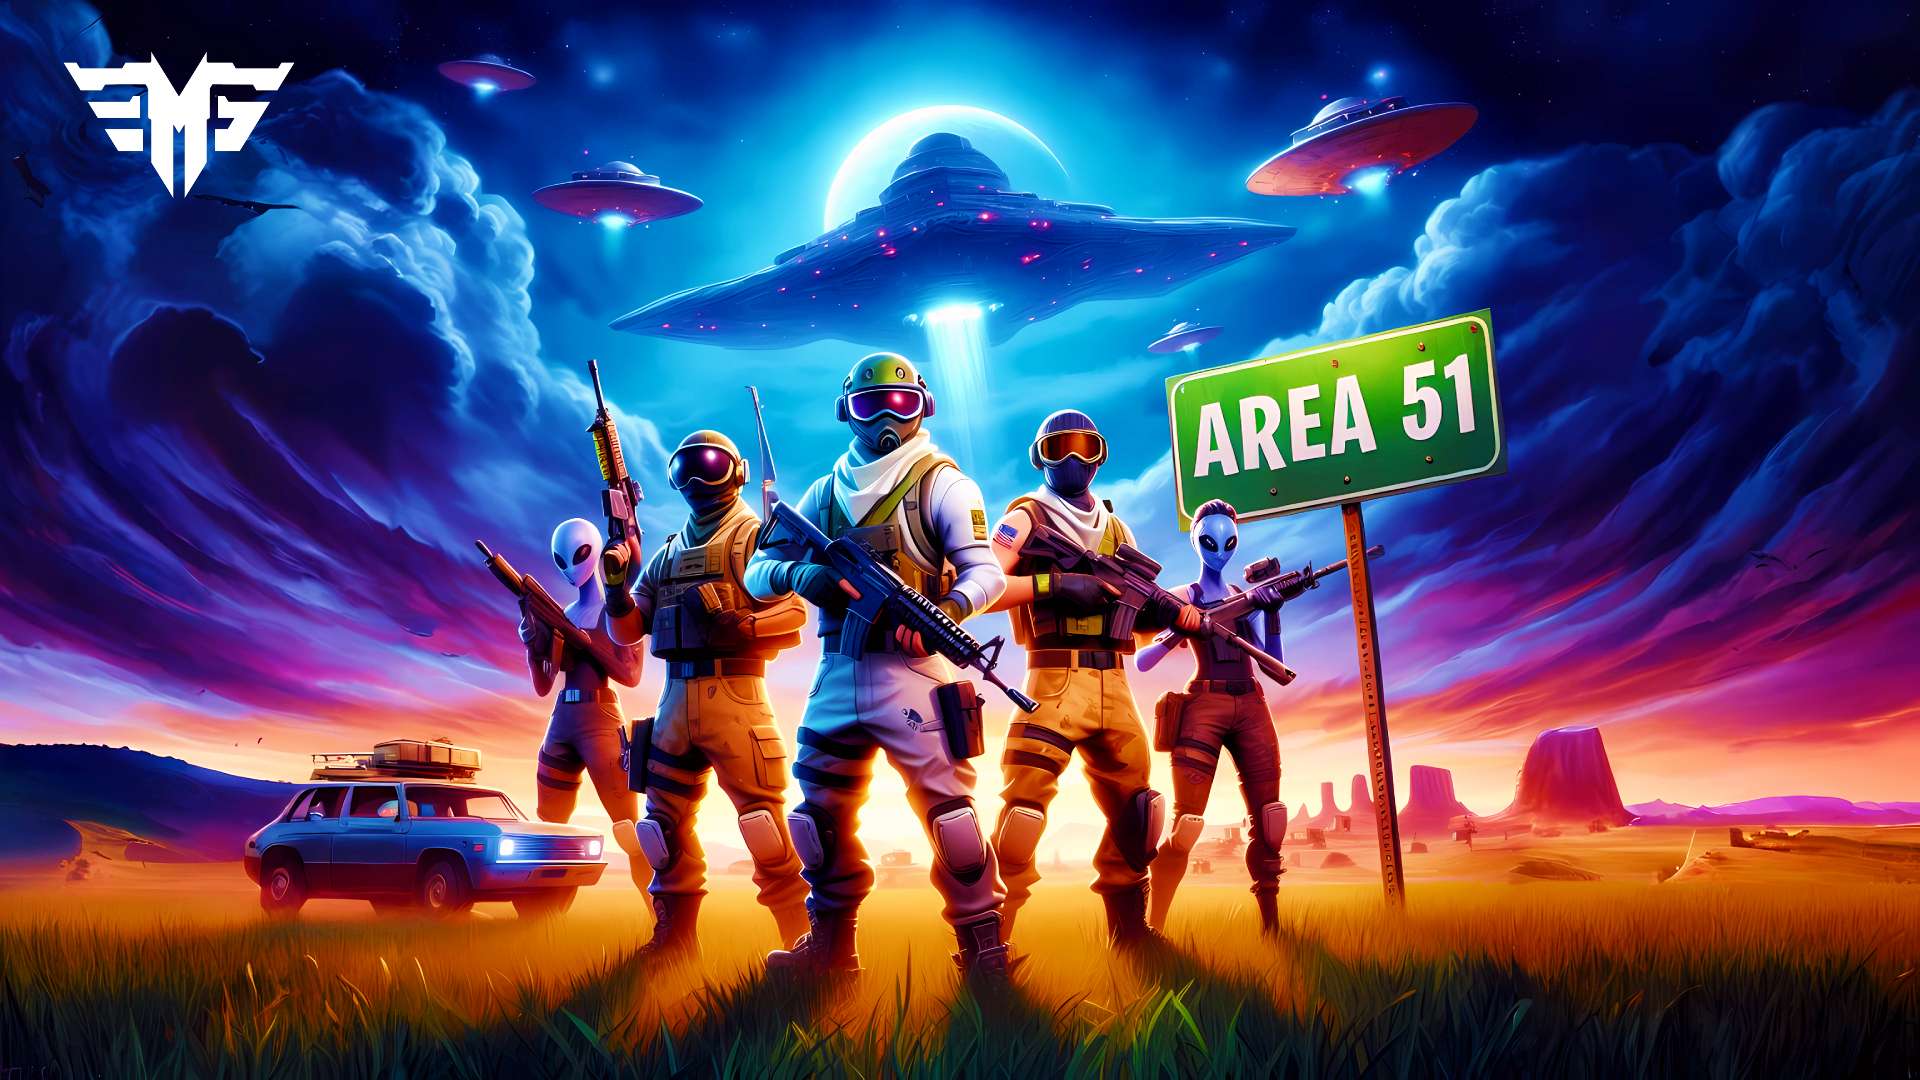 AREA 51 BY [EMG]